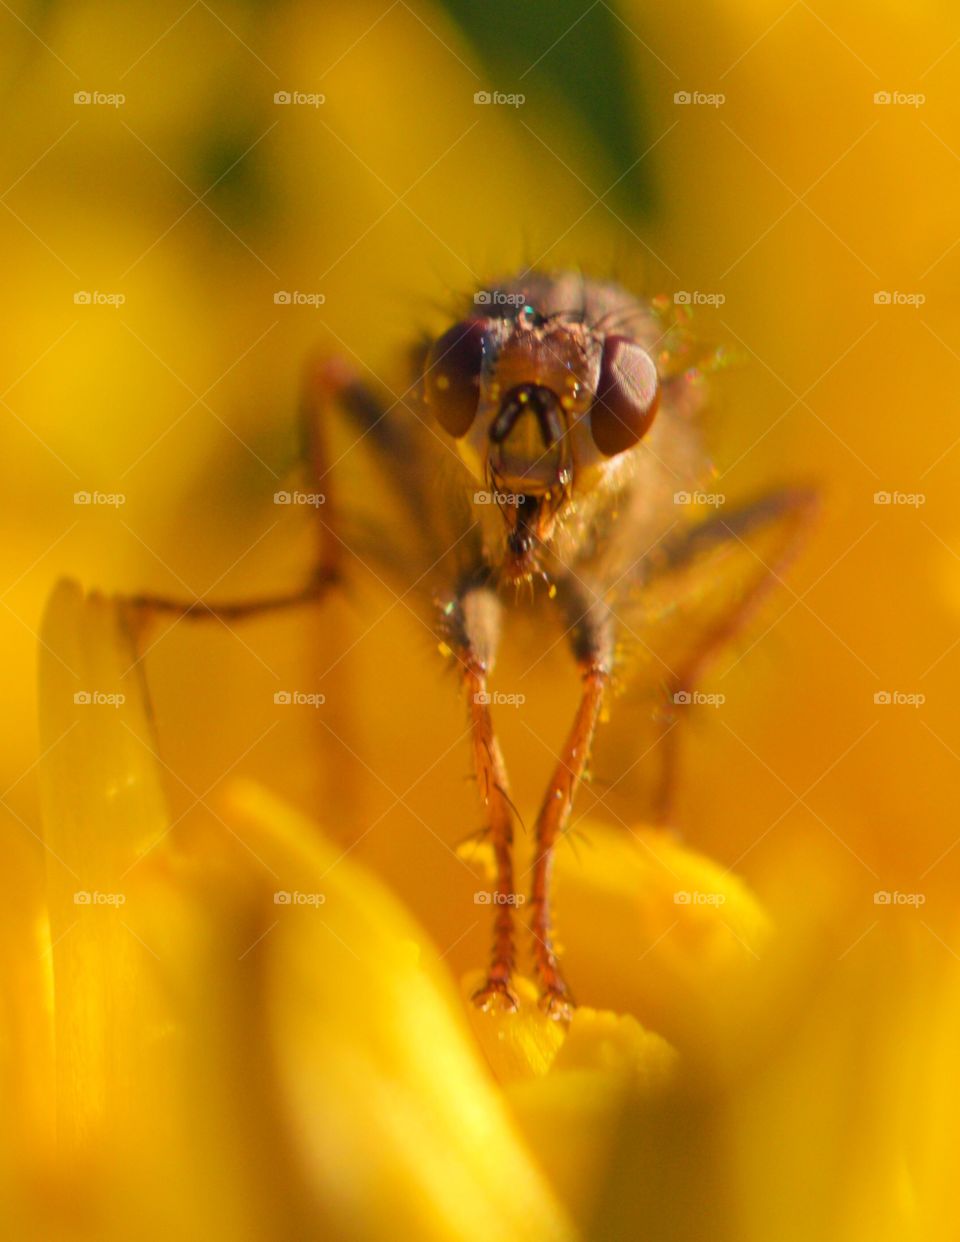 Flower fly close-up